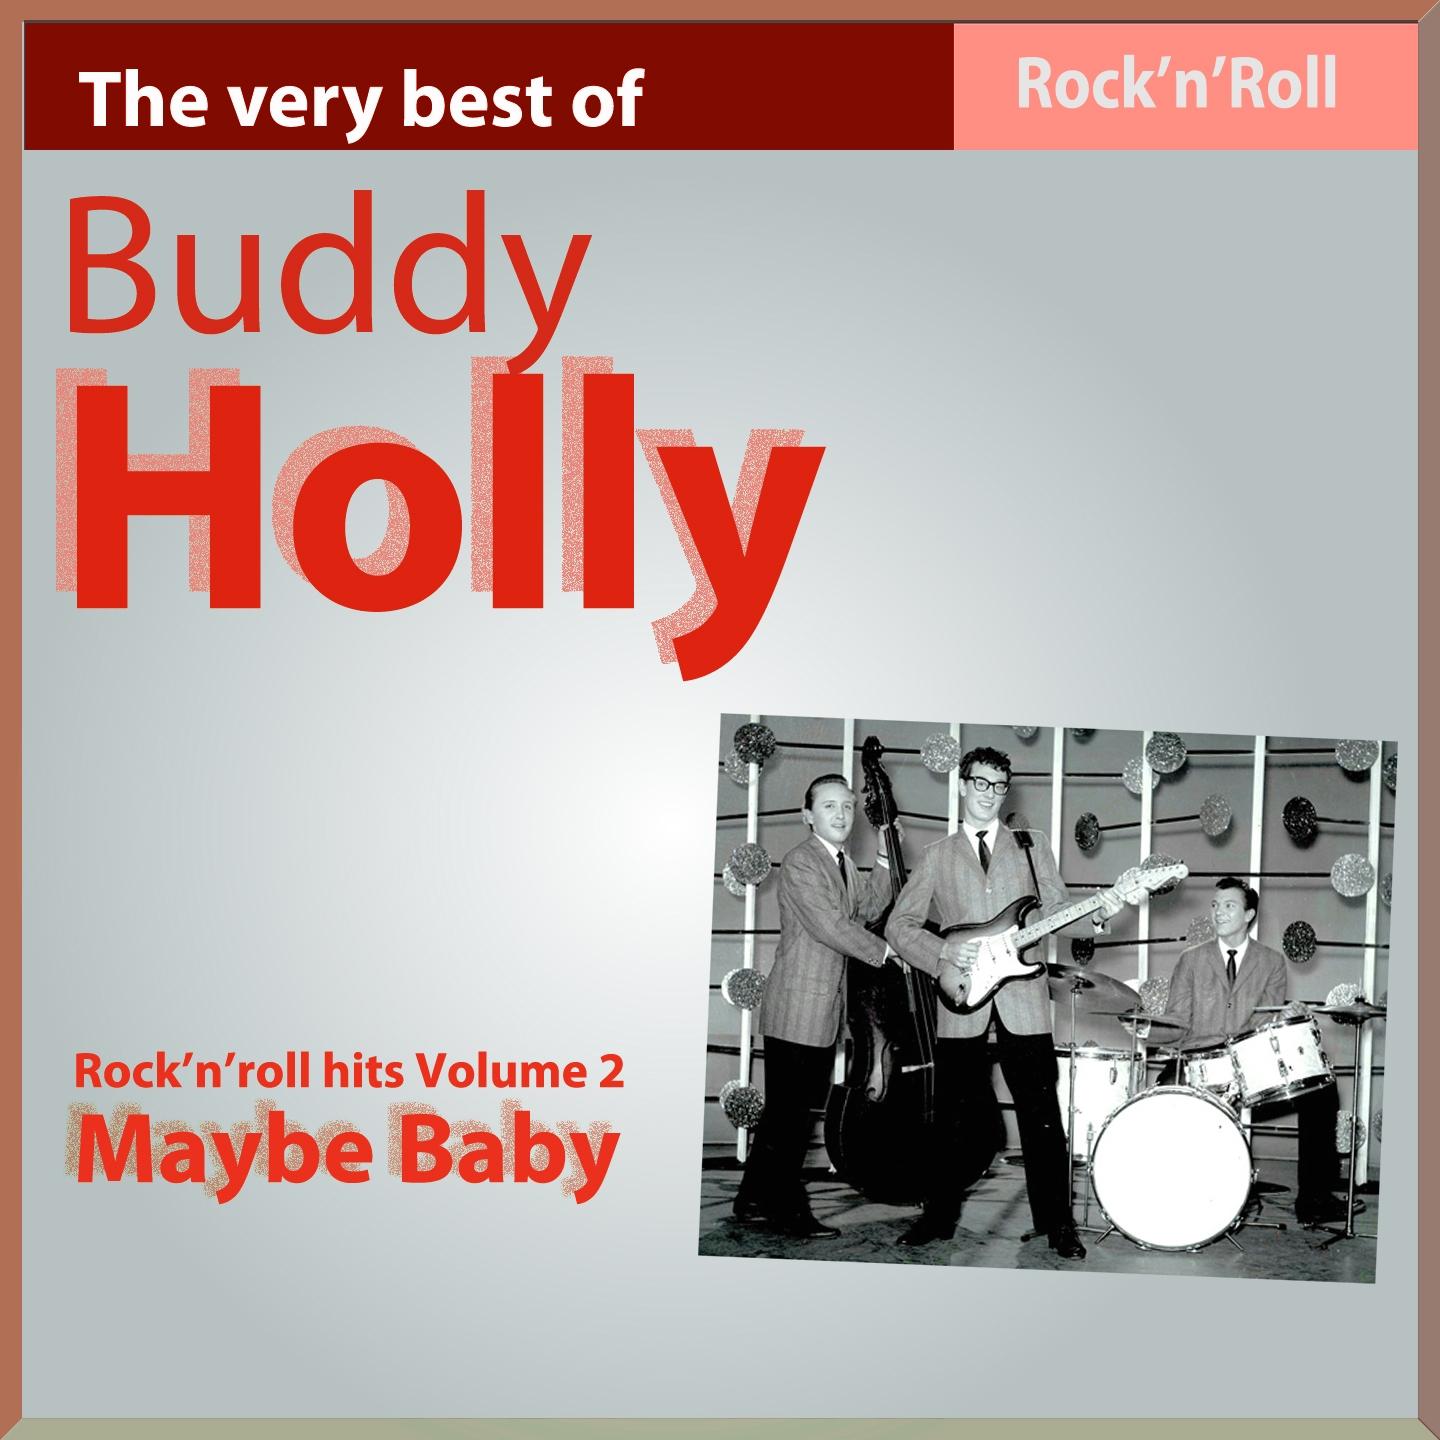 The Very Best of Buddy Holly: Maybe Baby